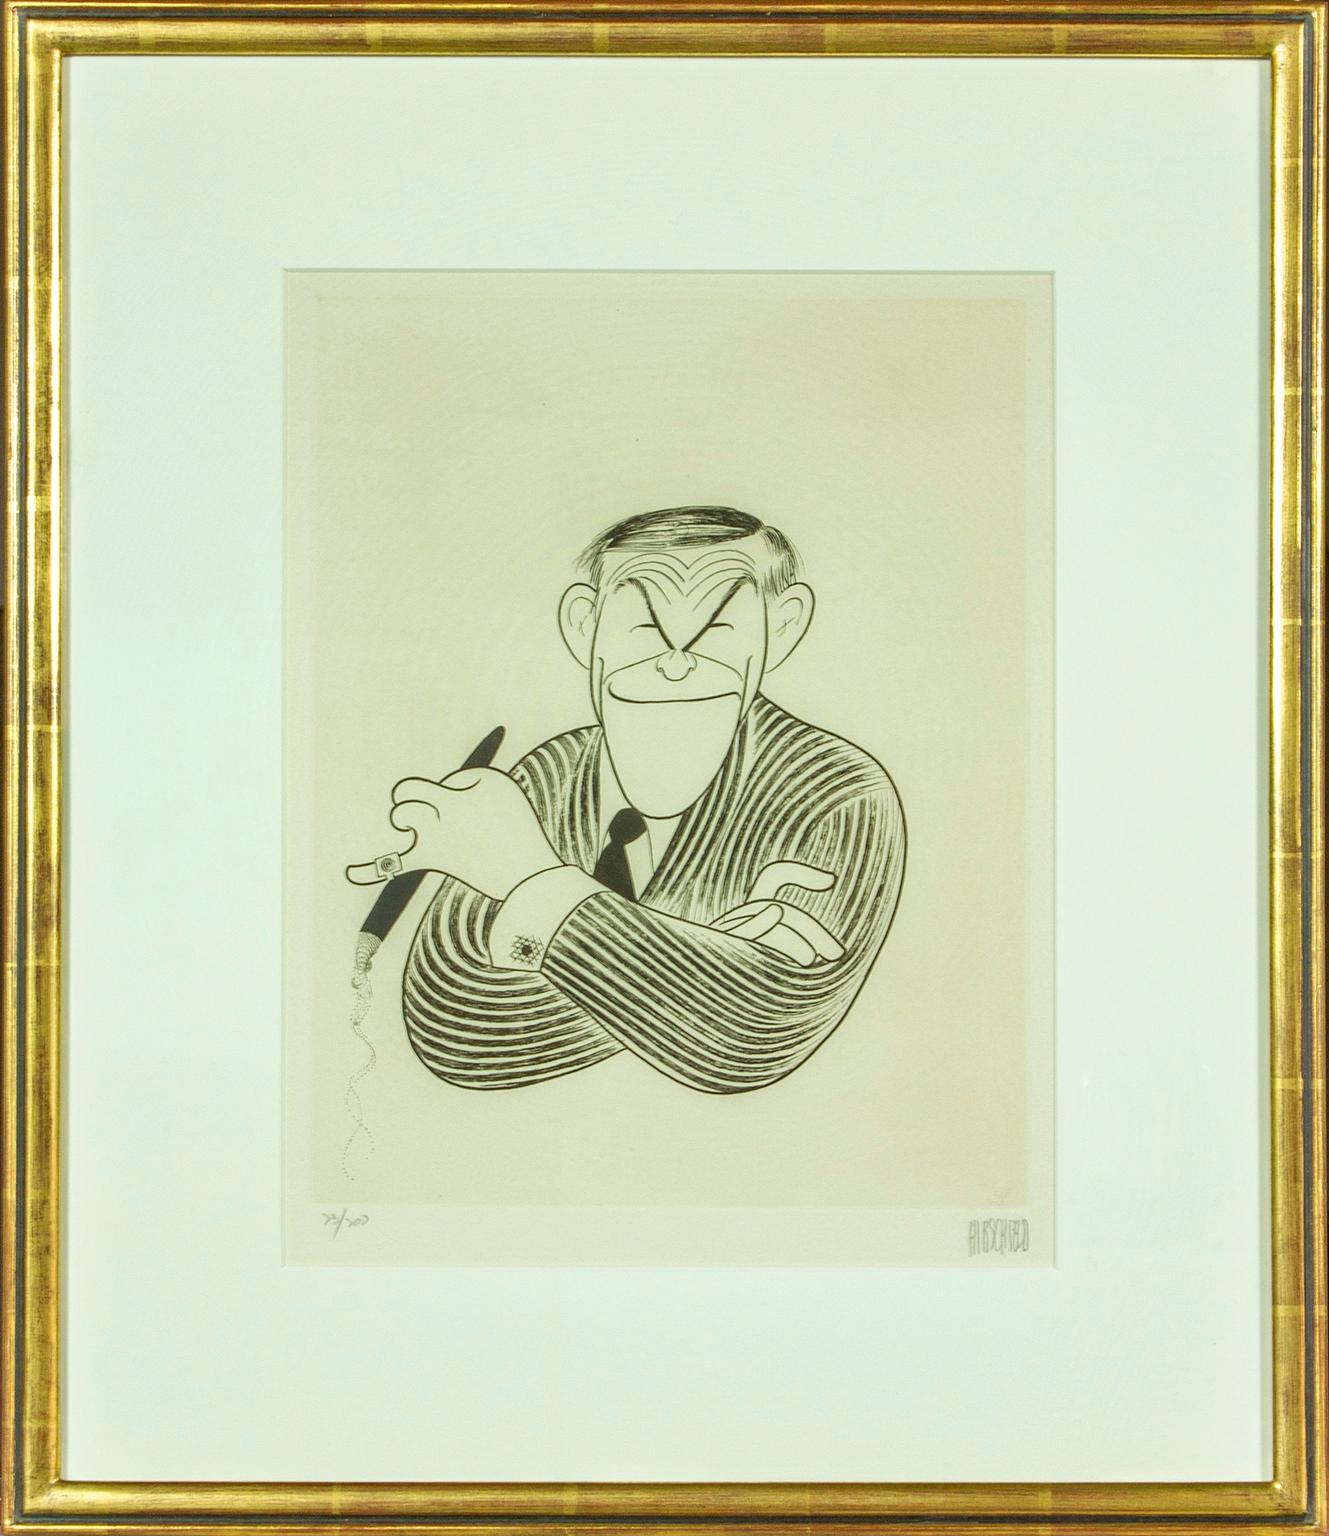 1982 "George Burns" original etching by Al Hirschfeld. Hand signed and numbered.